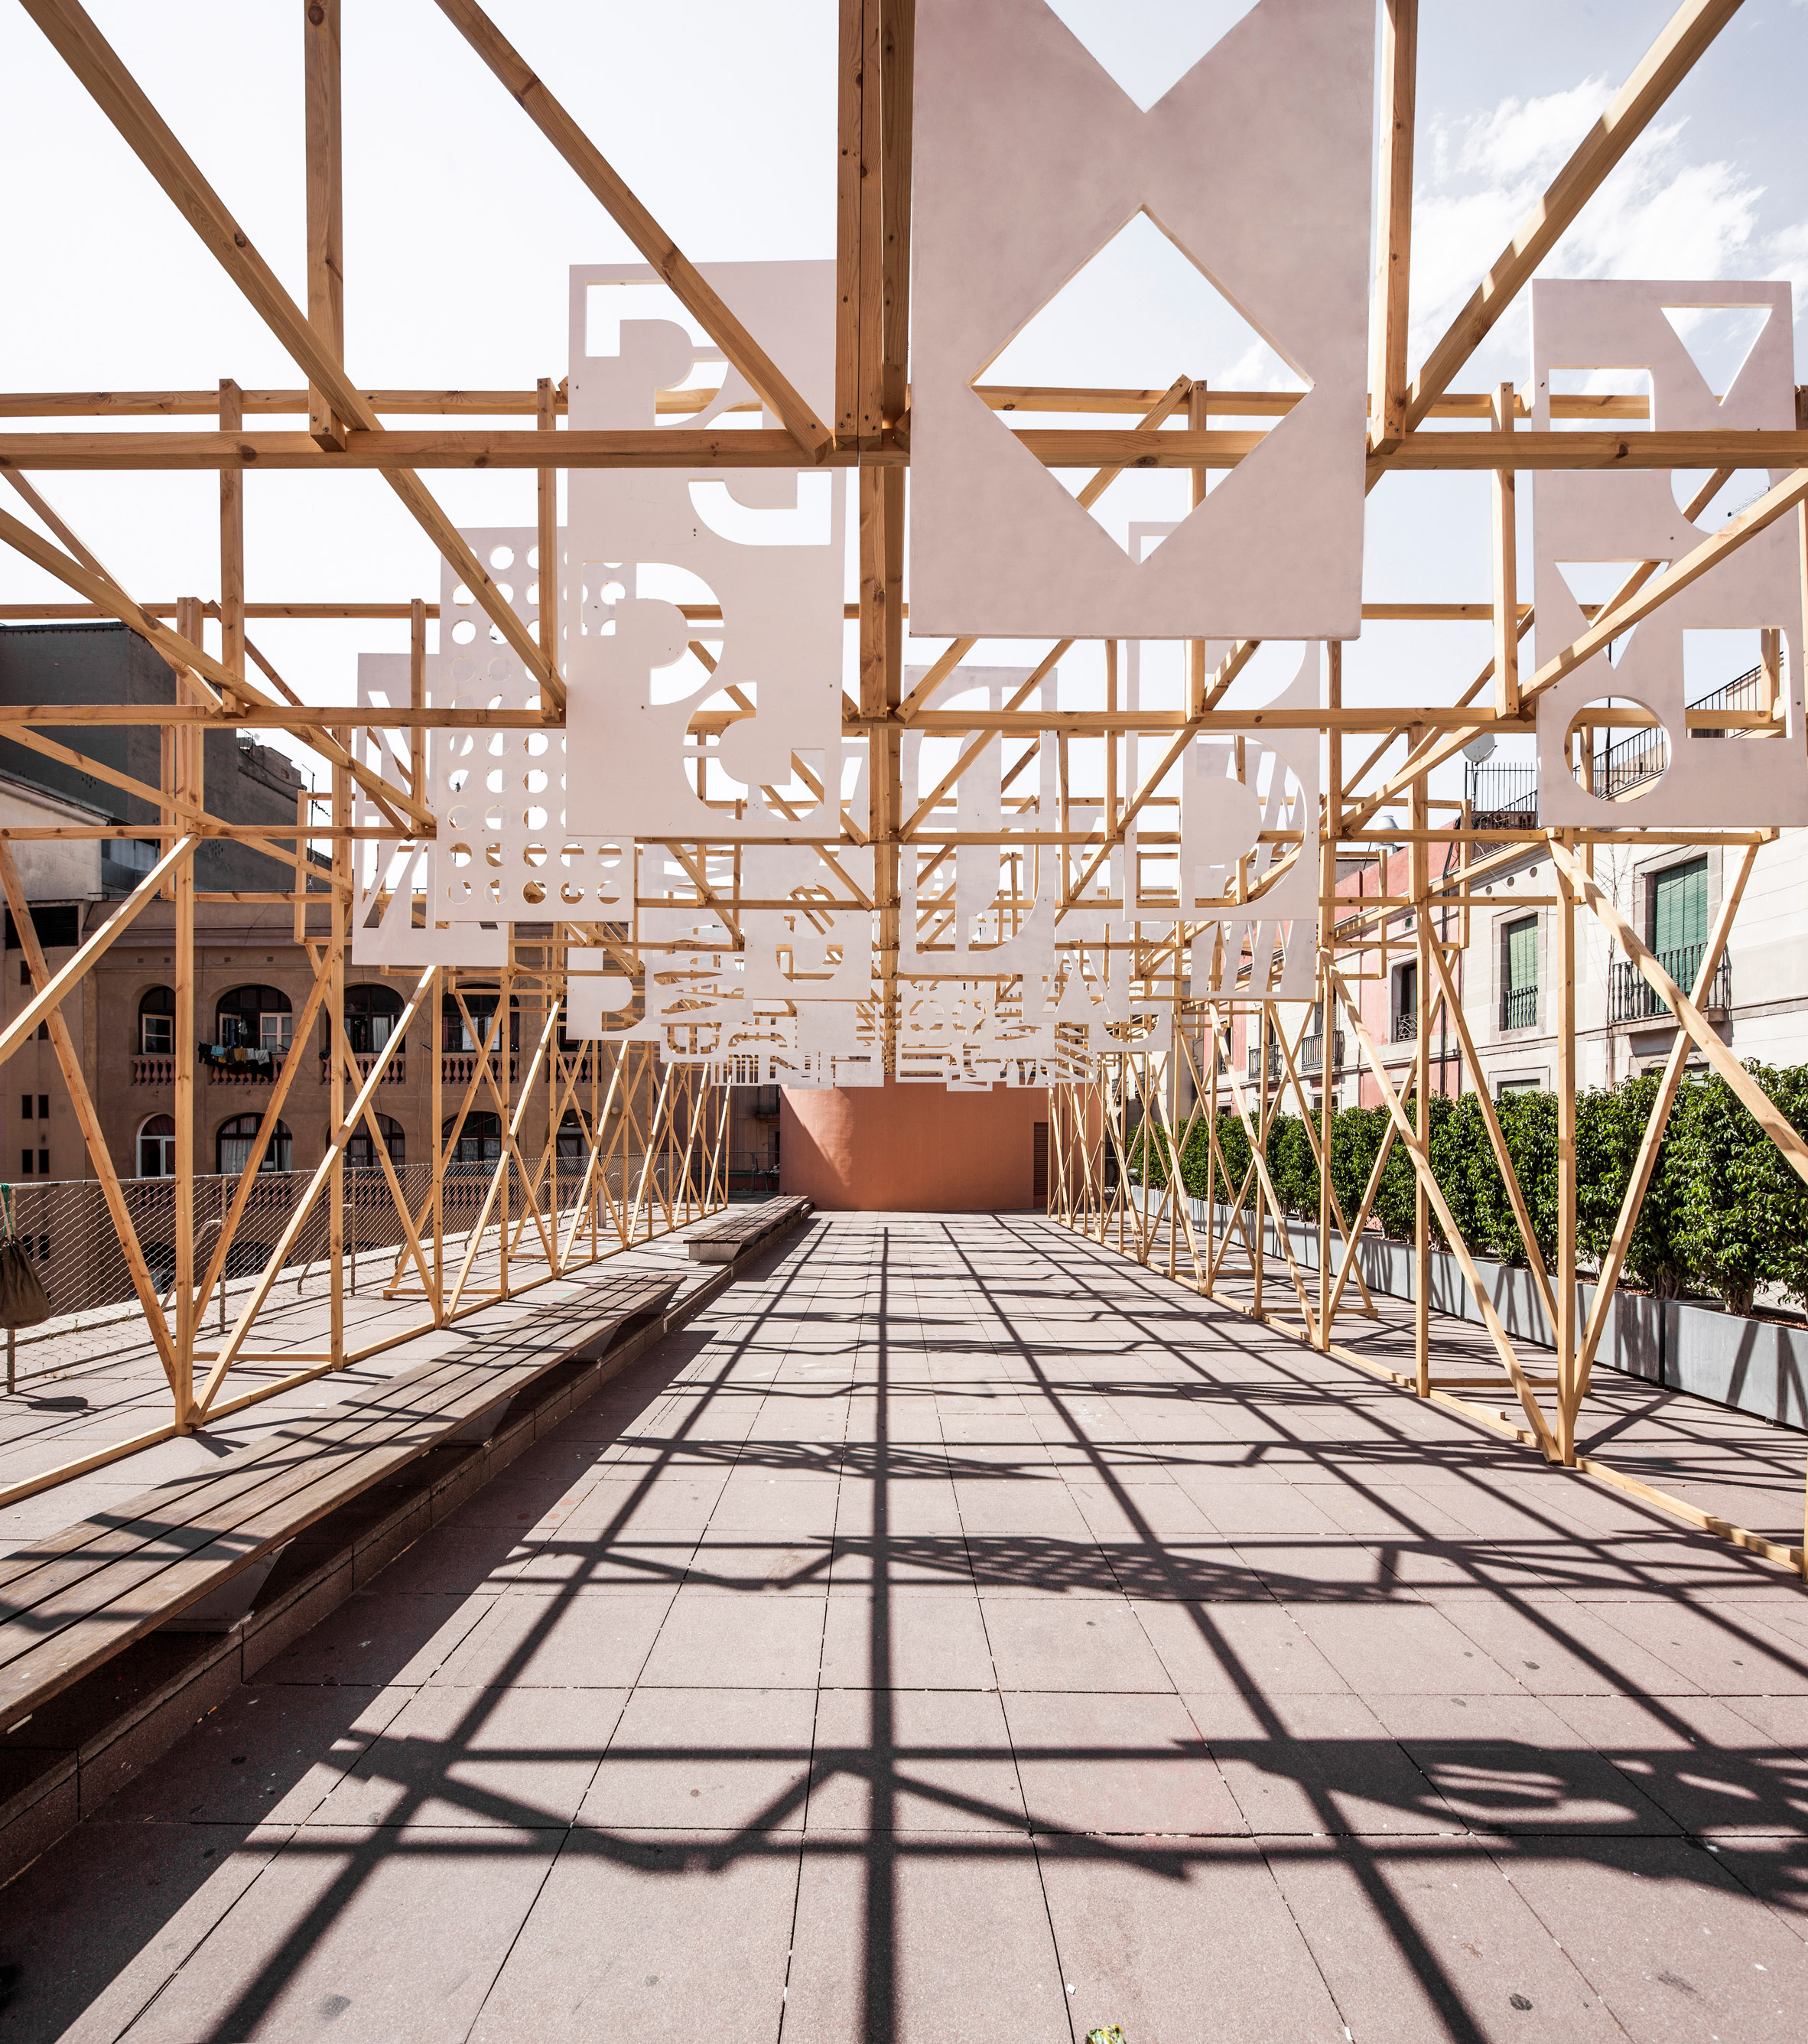 3kms summer pavilion by Eugeni Bach, Anthony Burrill and Elisava Barcelona students